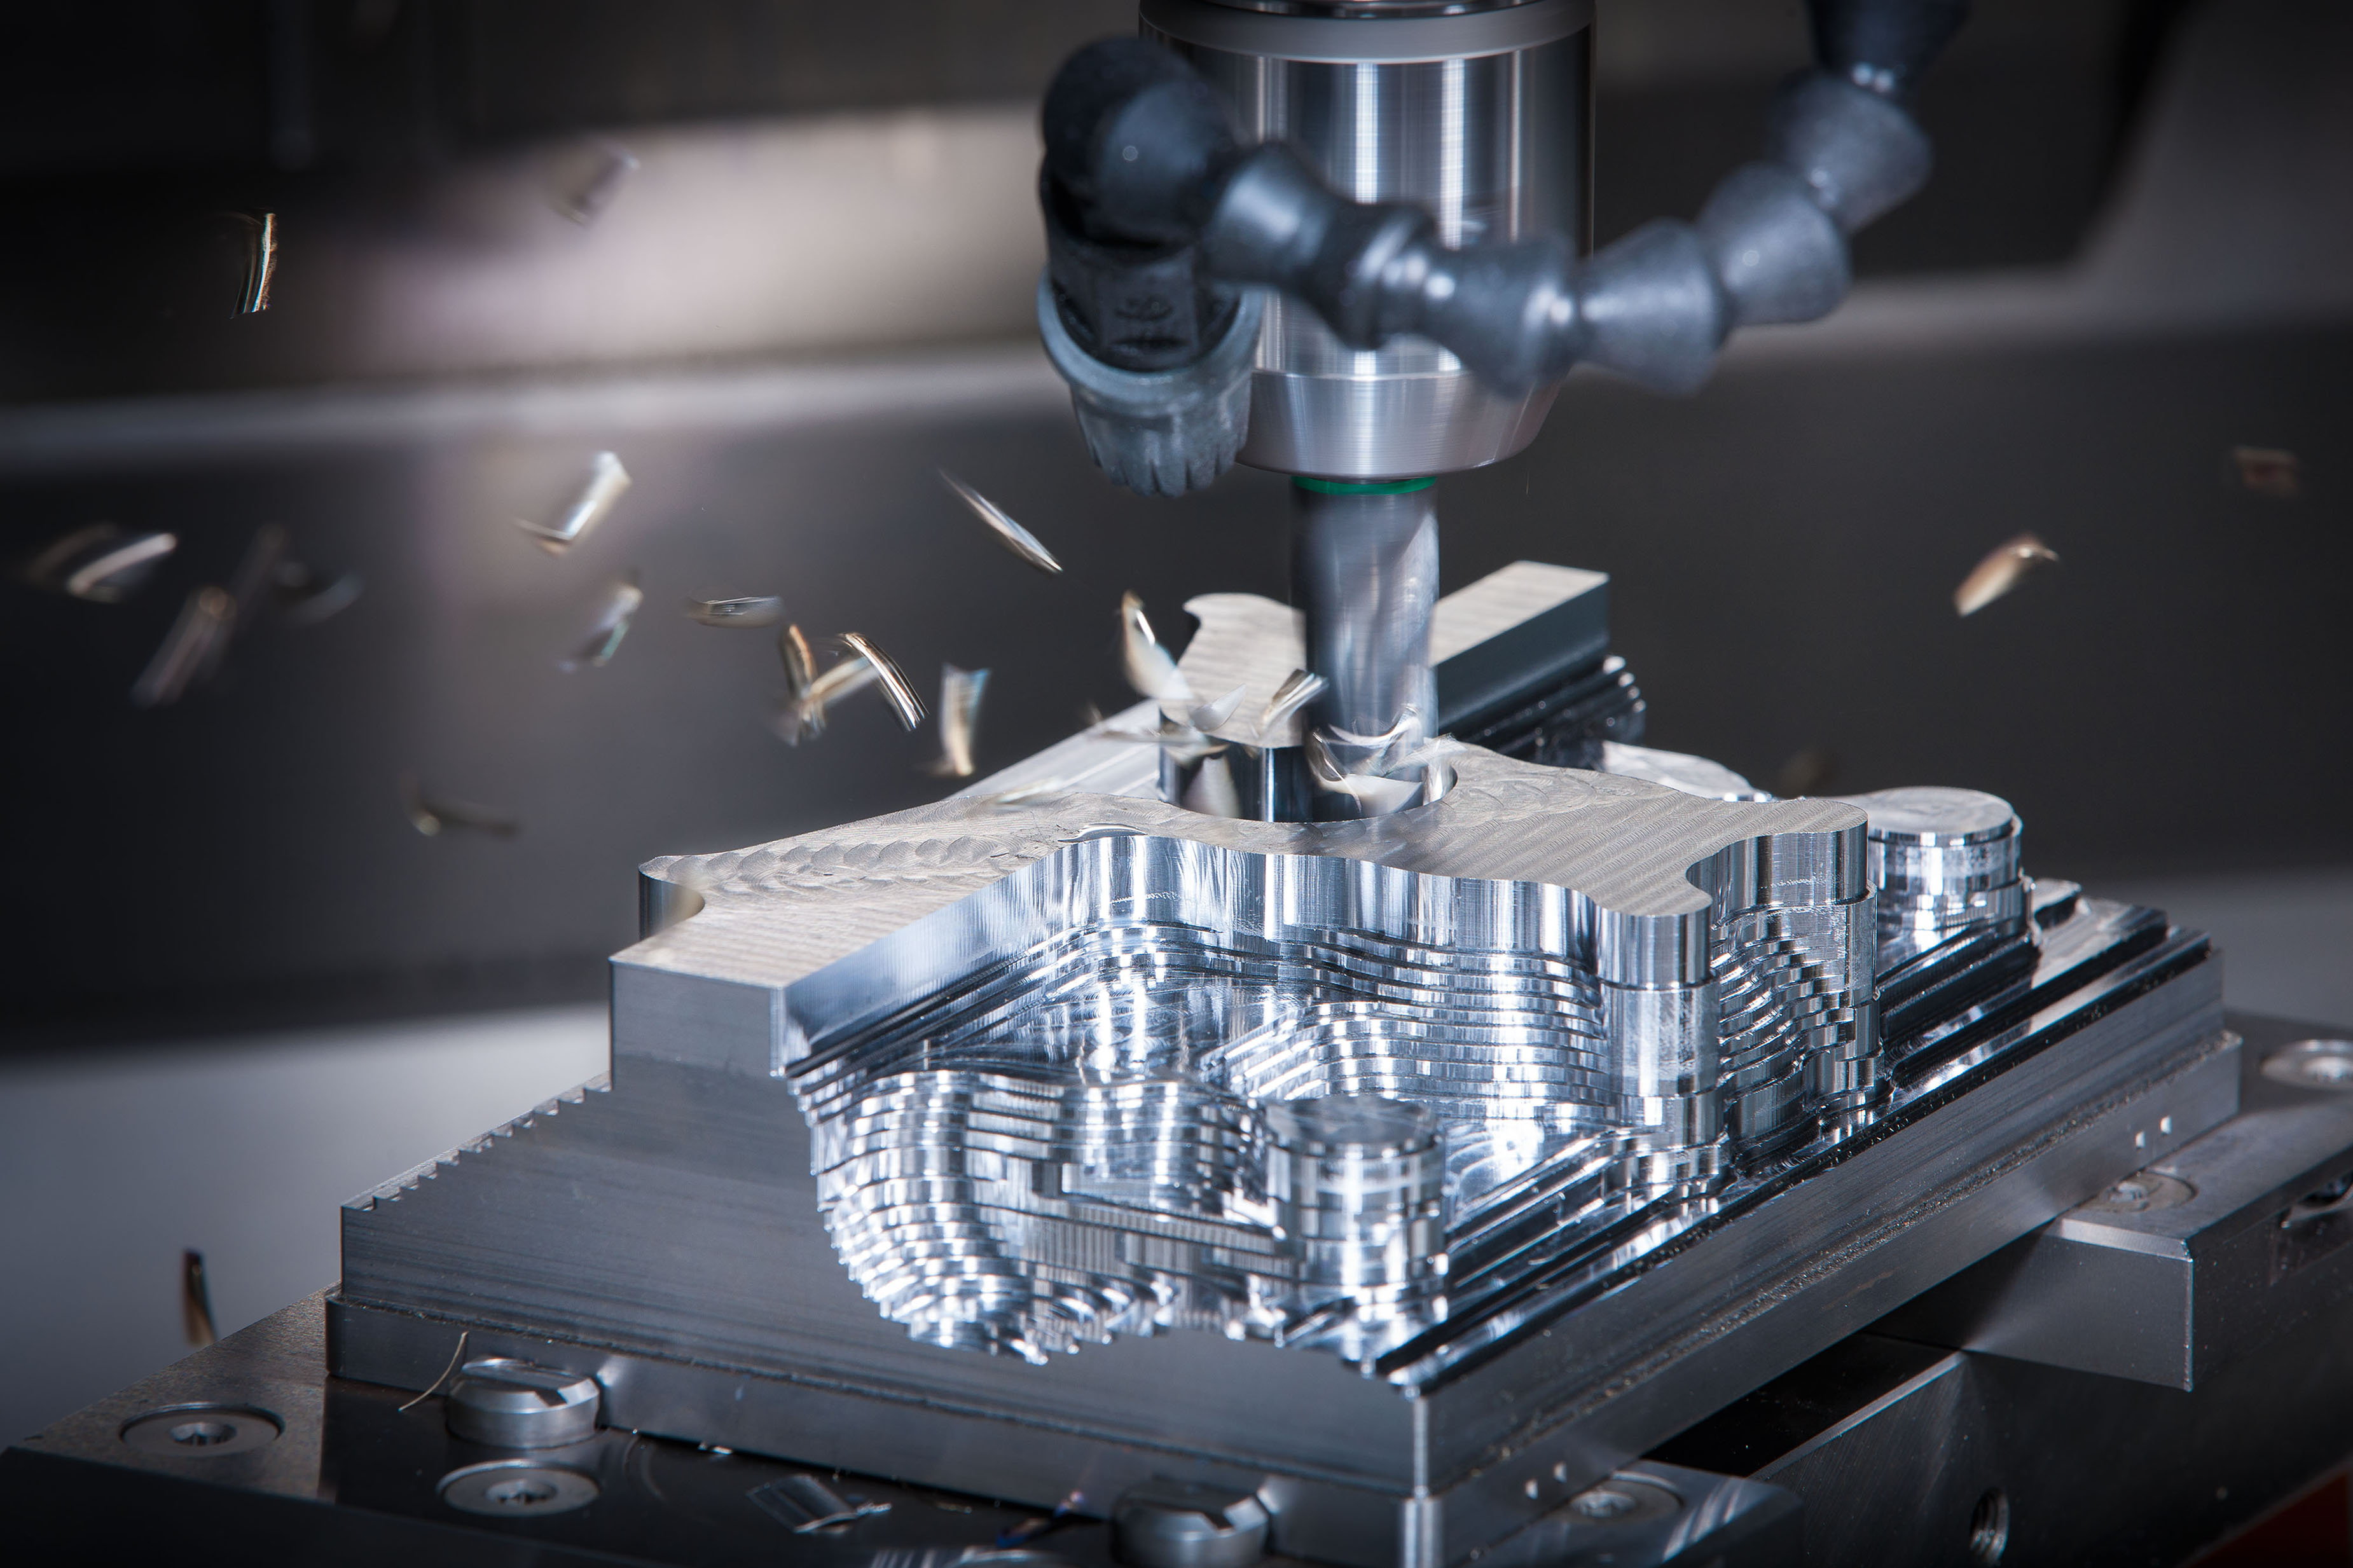 Cnc Wallpaper Advanced Cam Technology Jpg Image Free Download 3axis Co